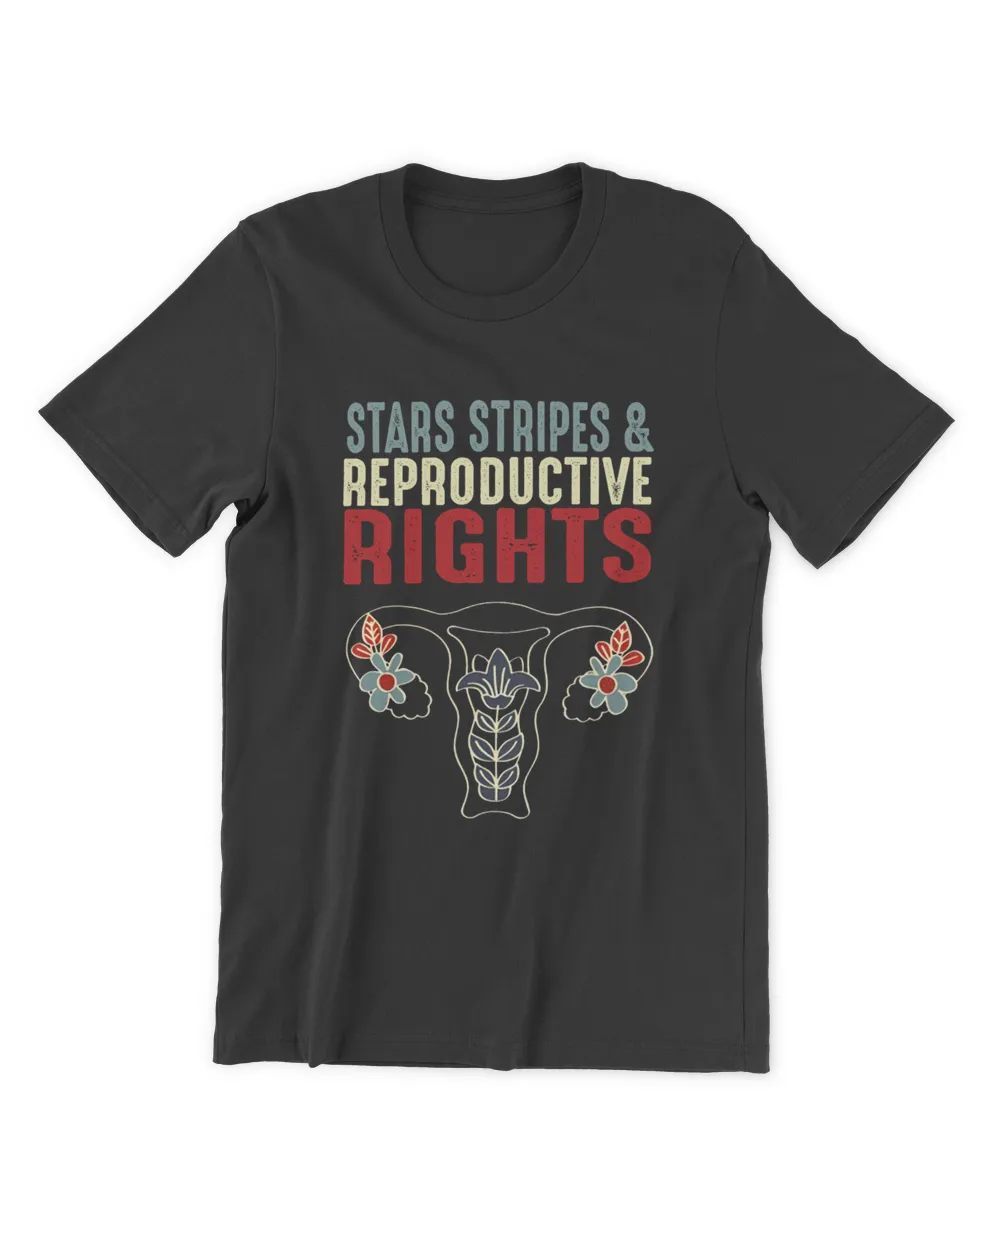 Stars Stripes and Reproductive Rights Feminist shirt